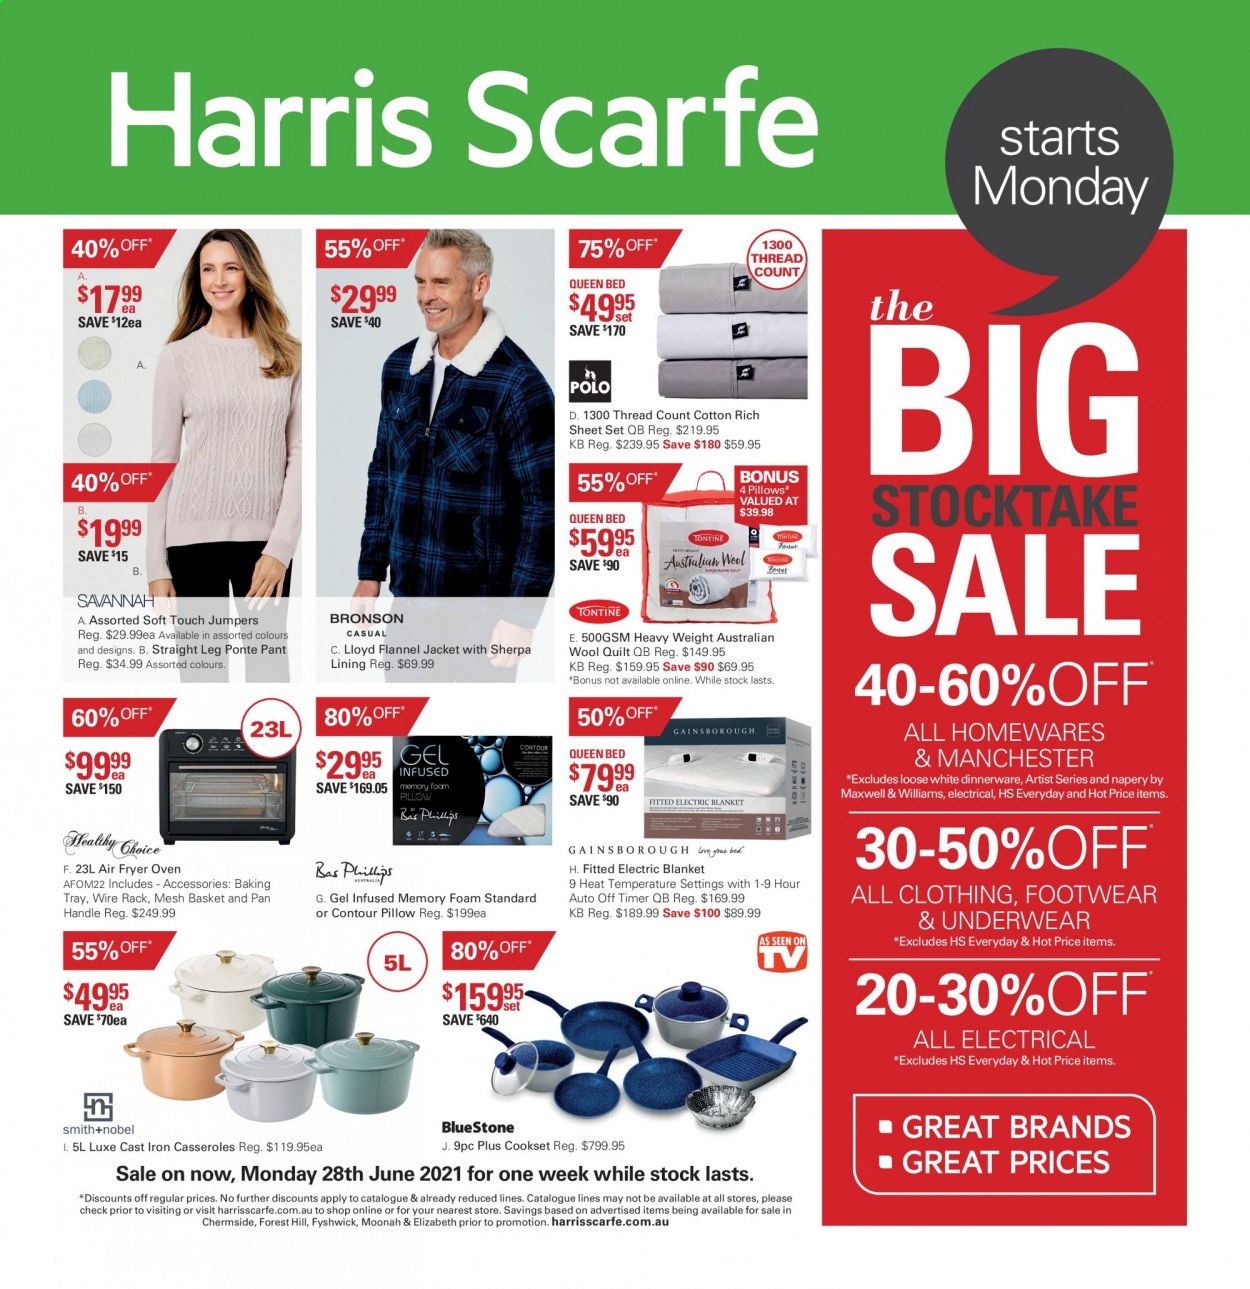 thumbnail - Harris Scarfe Catalogue - Sales products - basket, dinnerware set, pan, baking tray, blanket, pillow, quilt, wool quilt, oven, electric blanket, jacket, underwear. Page 1.